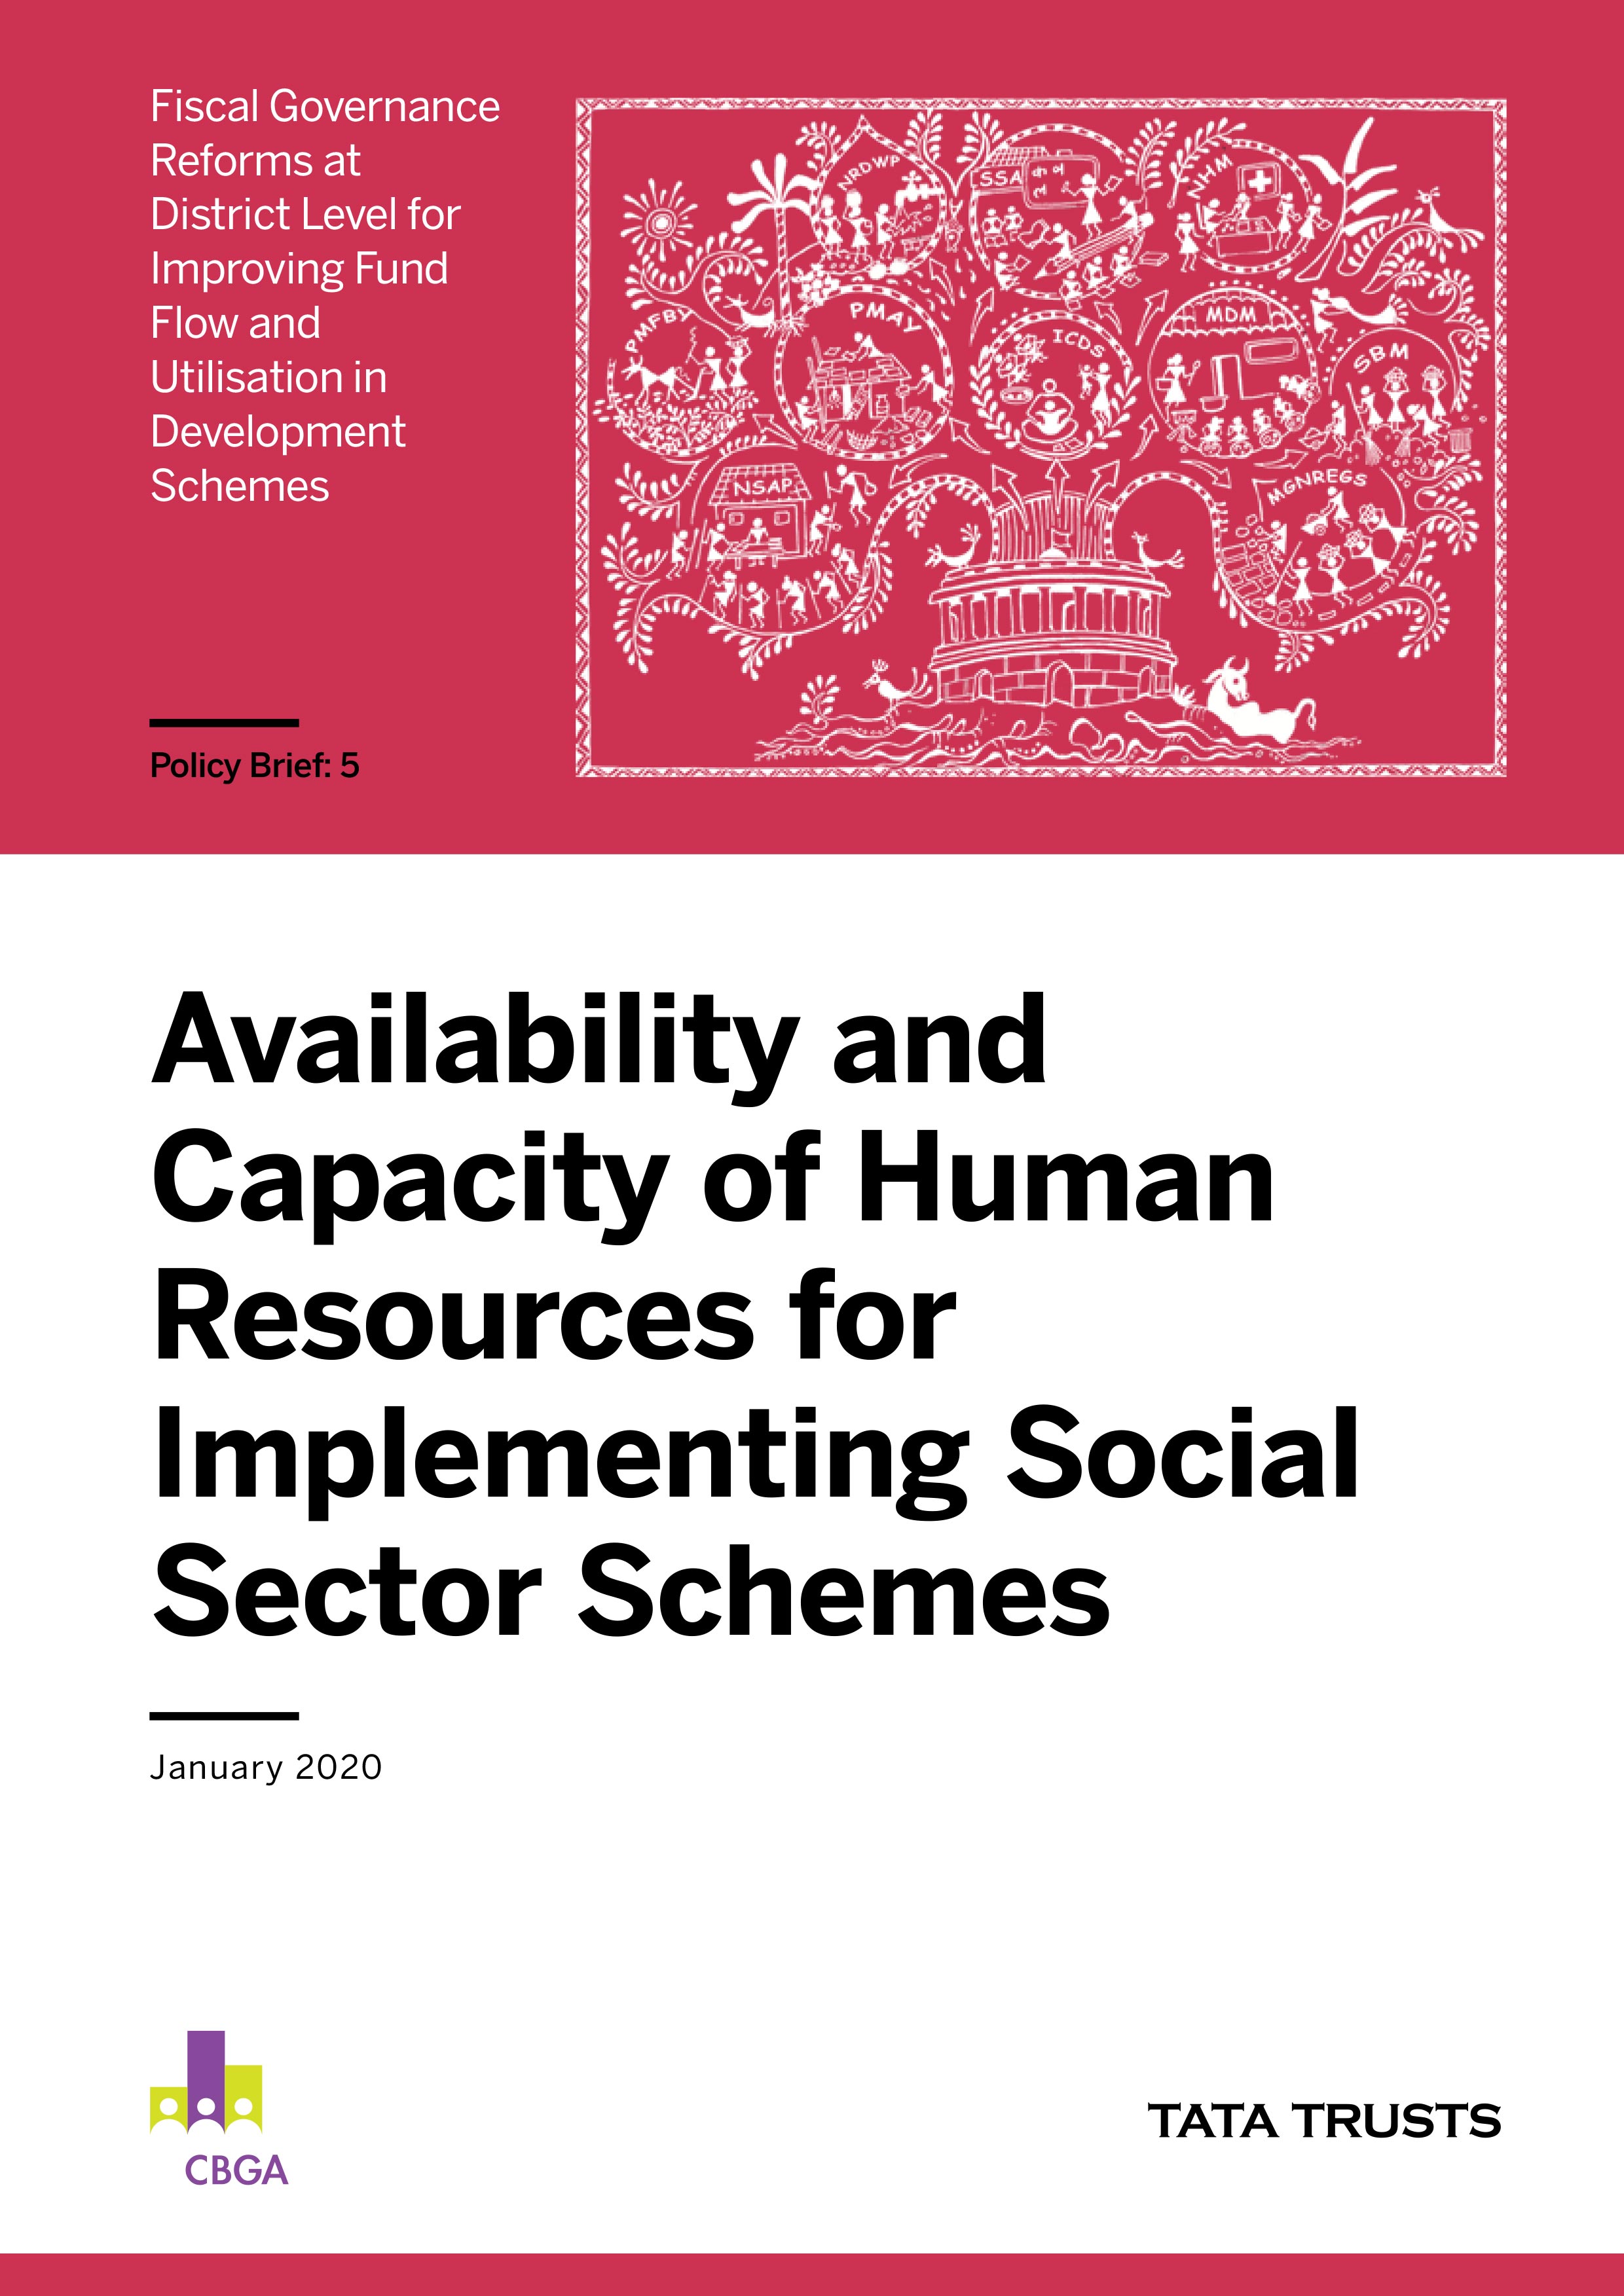 Human Resource Shortages in Social Sector-Policy Brief